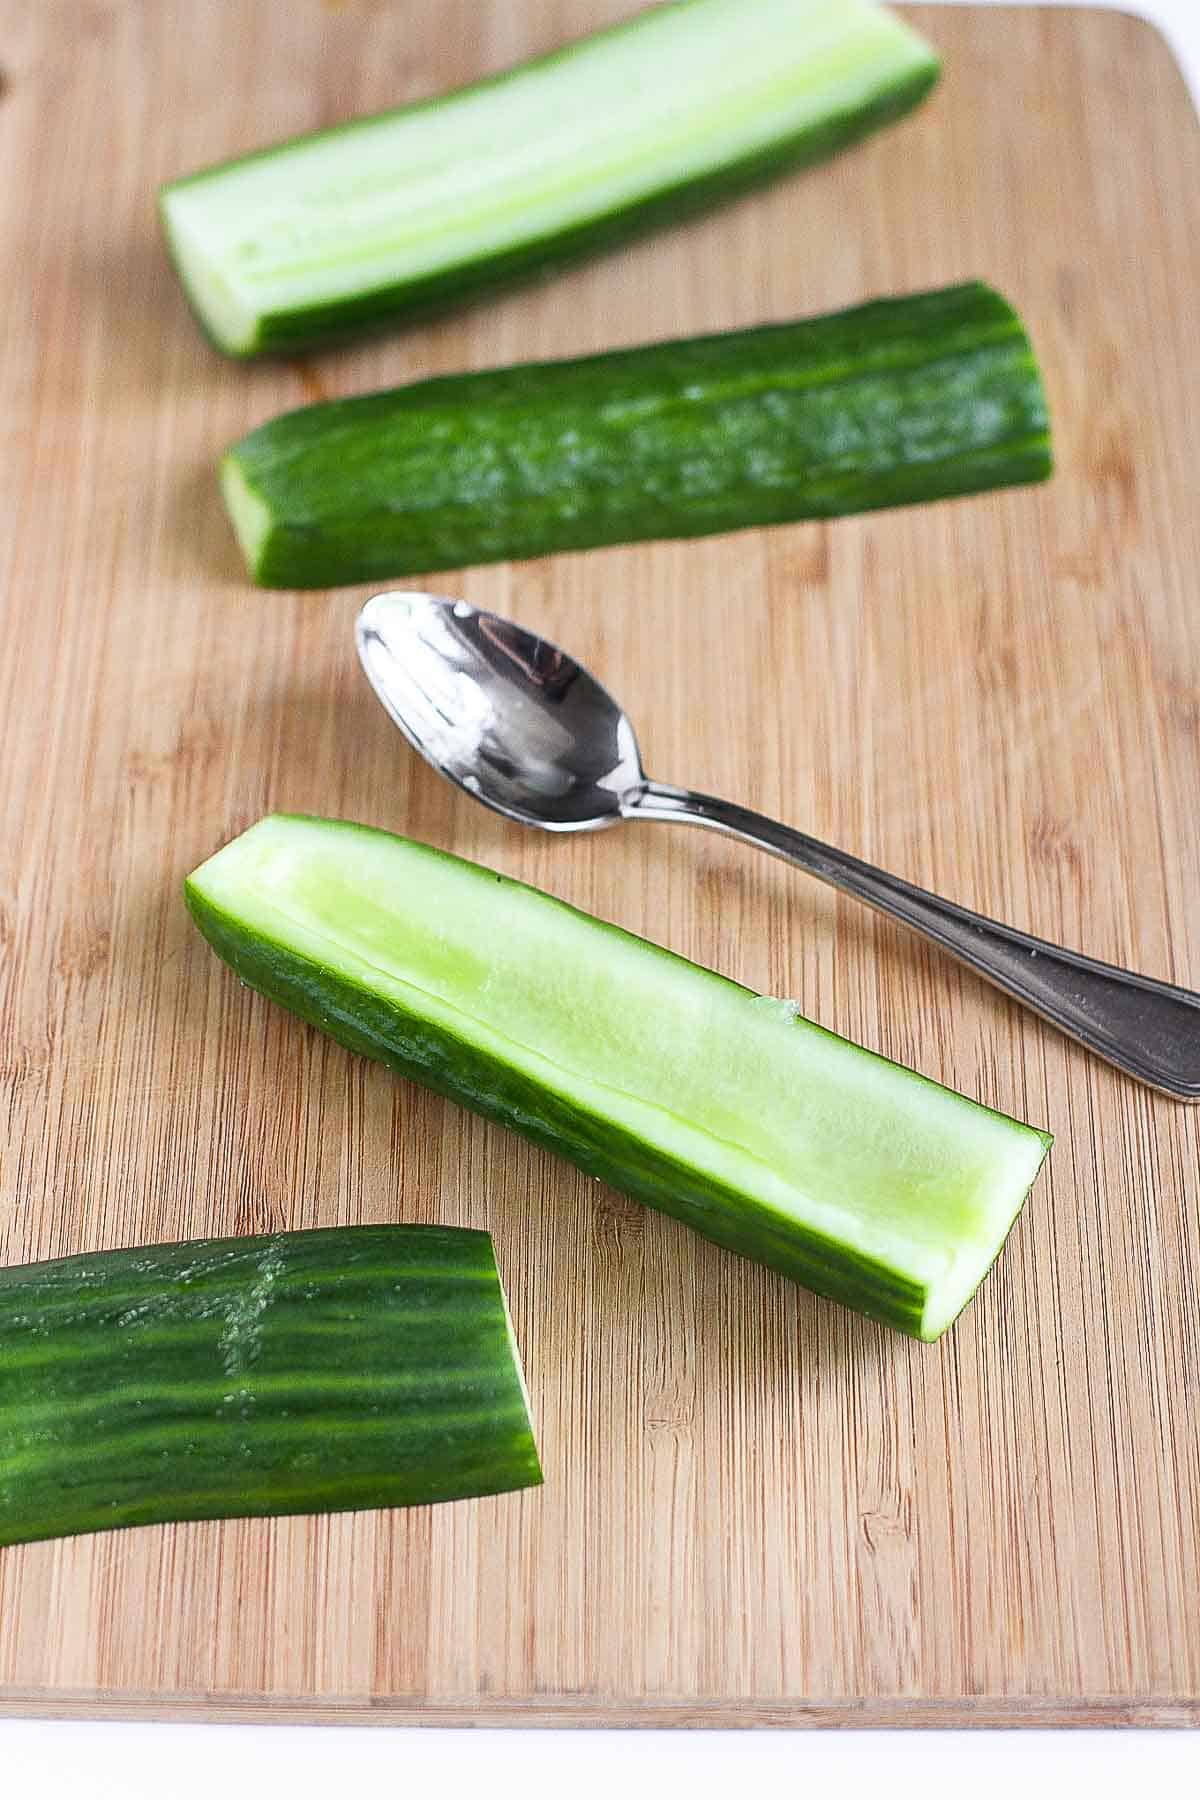 English cucumber halves with the seeds scooped out.